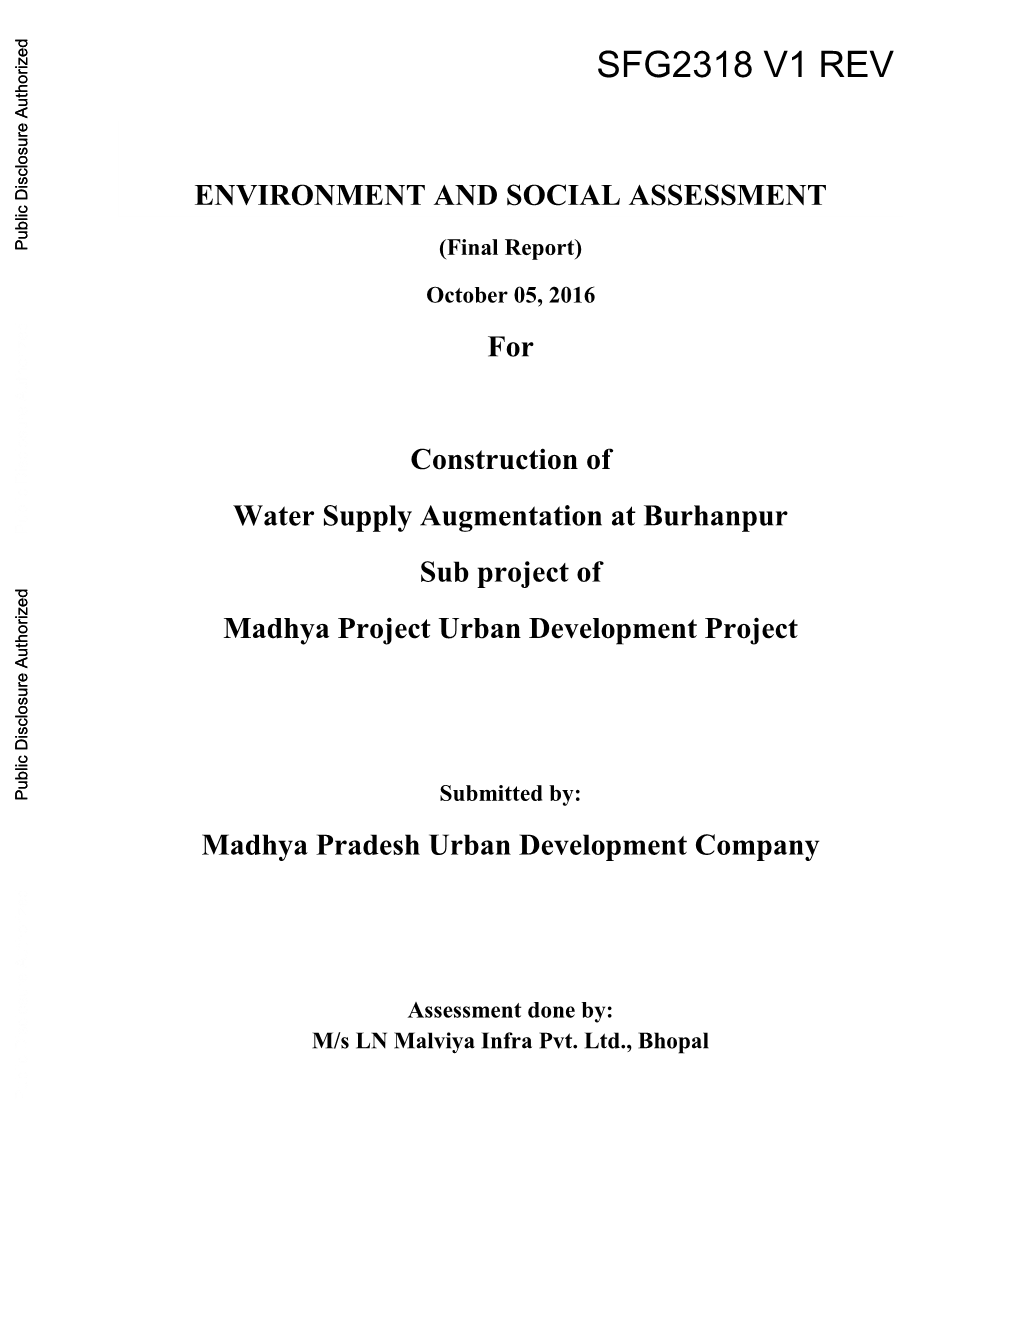 Environment and Social Assessment